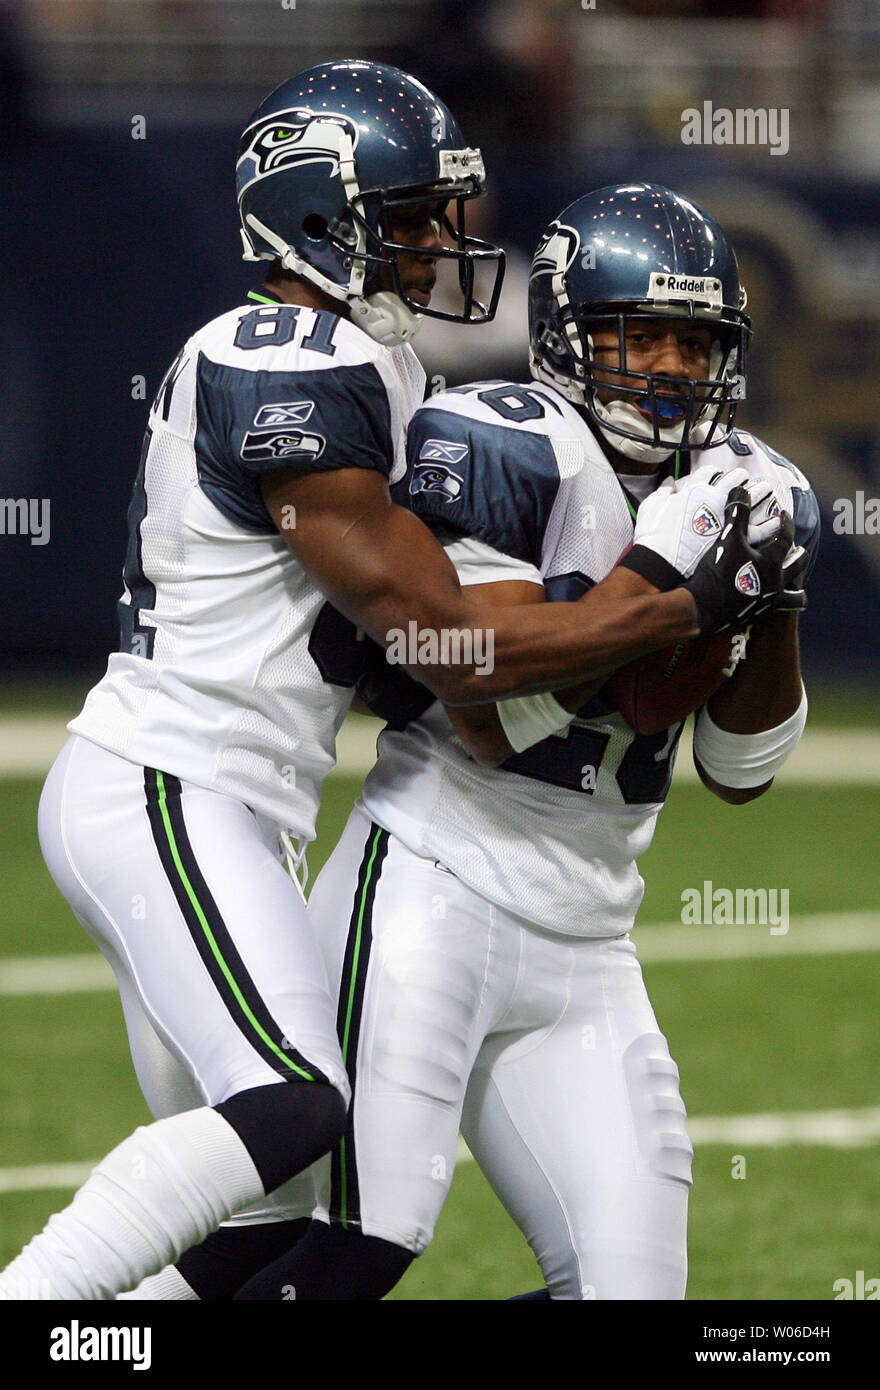 Seattle Seahawks Nate Burleson (L) and Josh Wilson collide after confusion on who should take the St. Louis Rams kickoff return in the first quarter at the Edward Jones Dome in St. Louis on November 25, 2007. (UPI Photo/Bill Greenblatt) Stock Photo